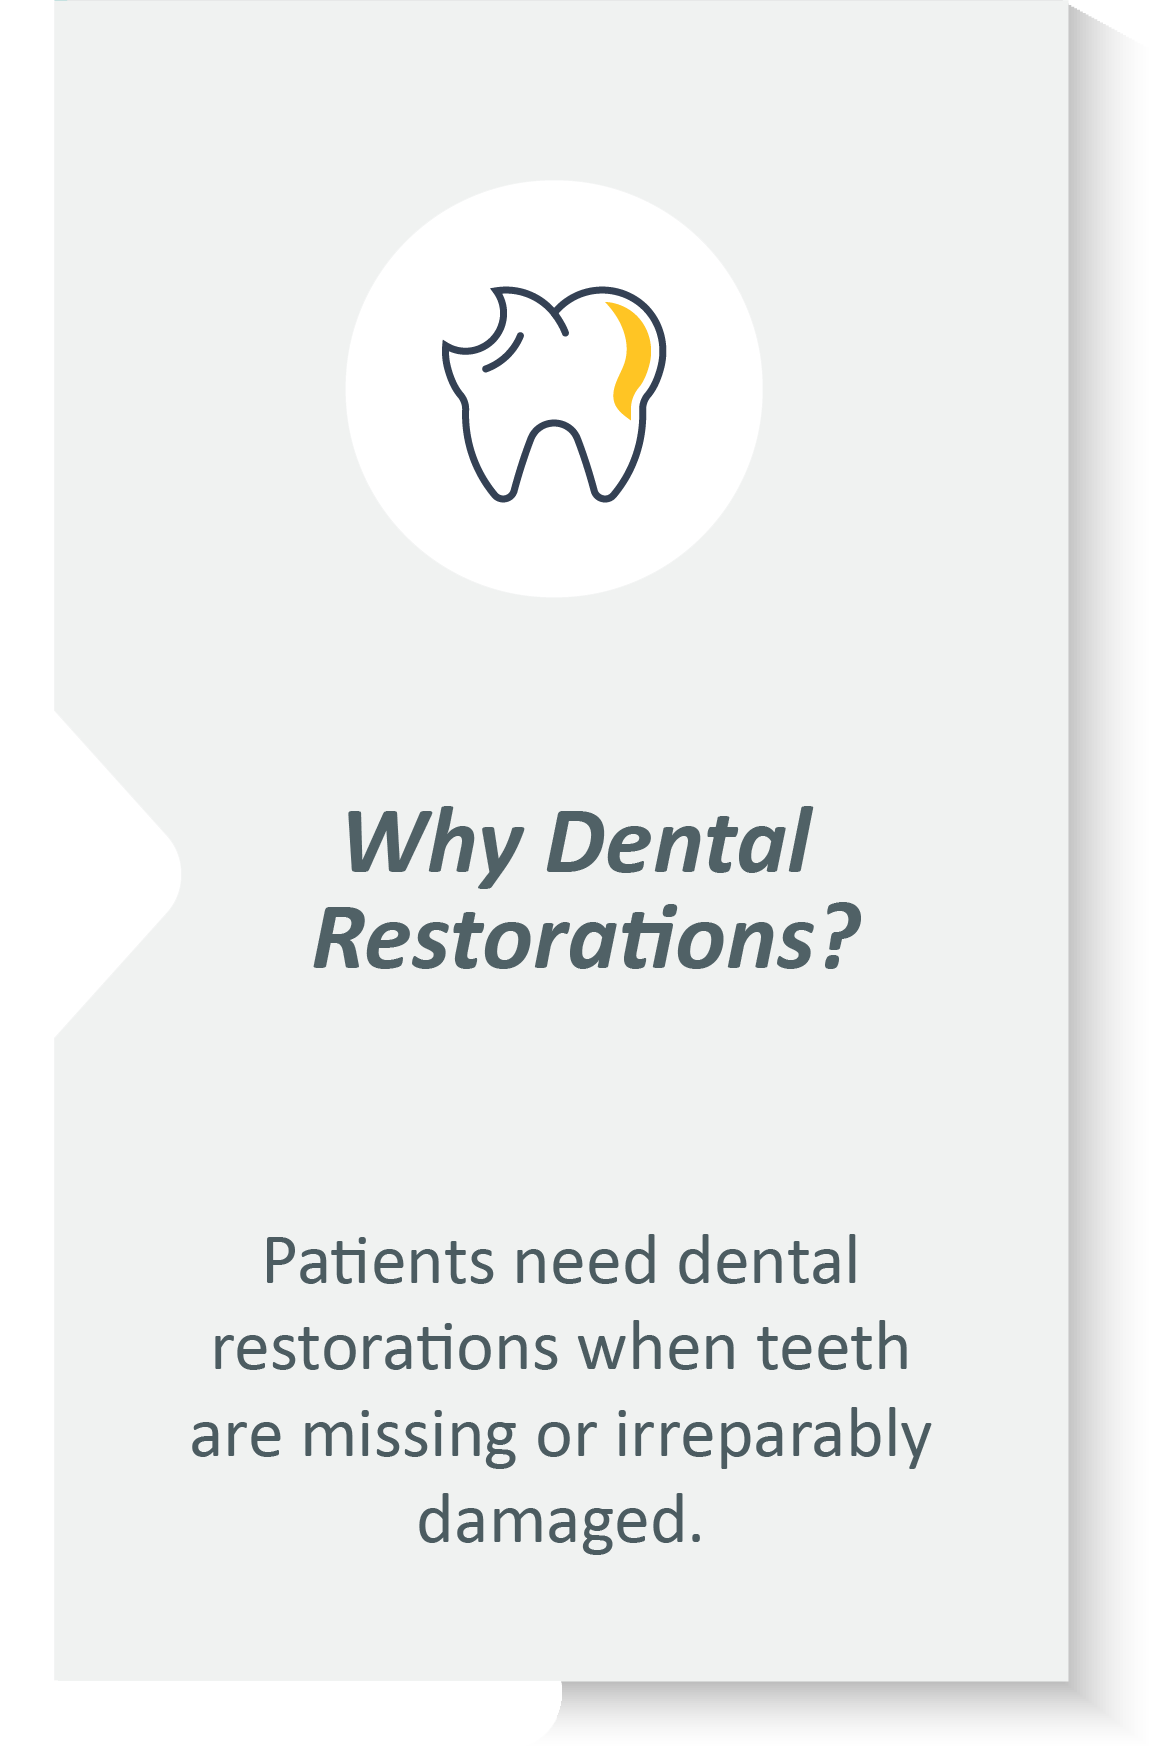 Dental restorations infographic: Patients need dental restorations when teeth are missing or irreparably damaged.